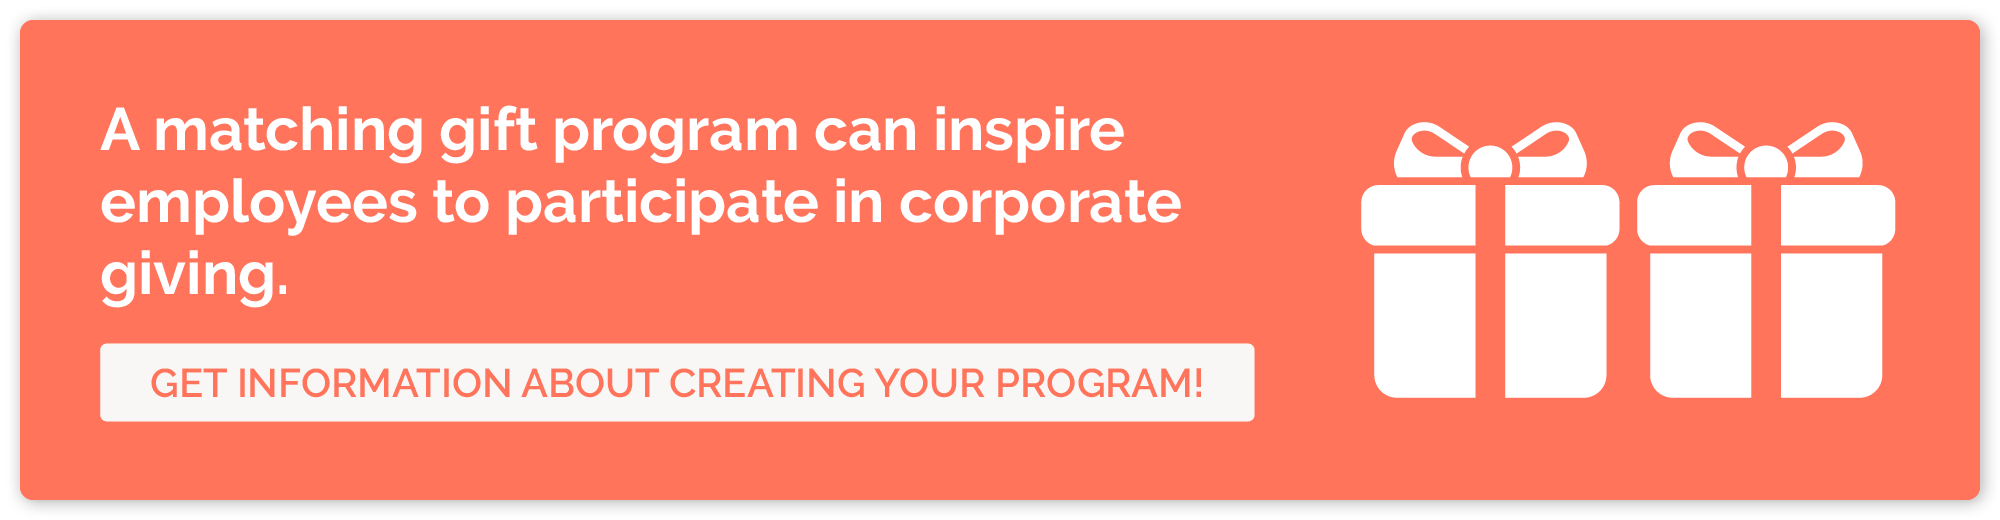 Click here to contact our team about creating an employee matching gift program.